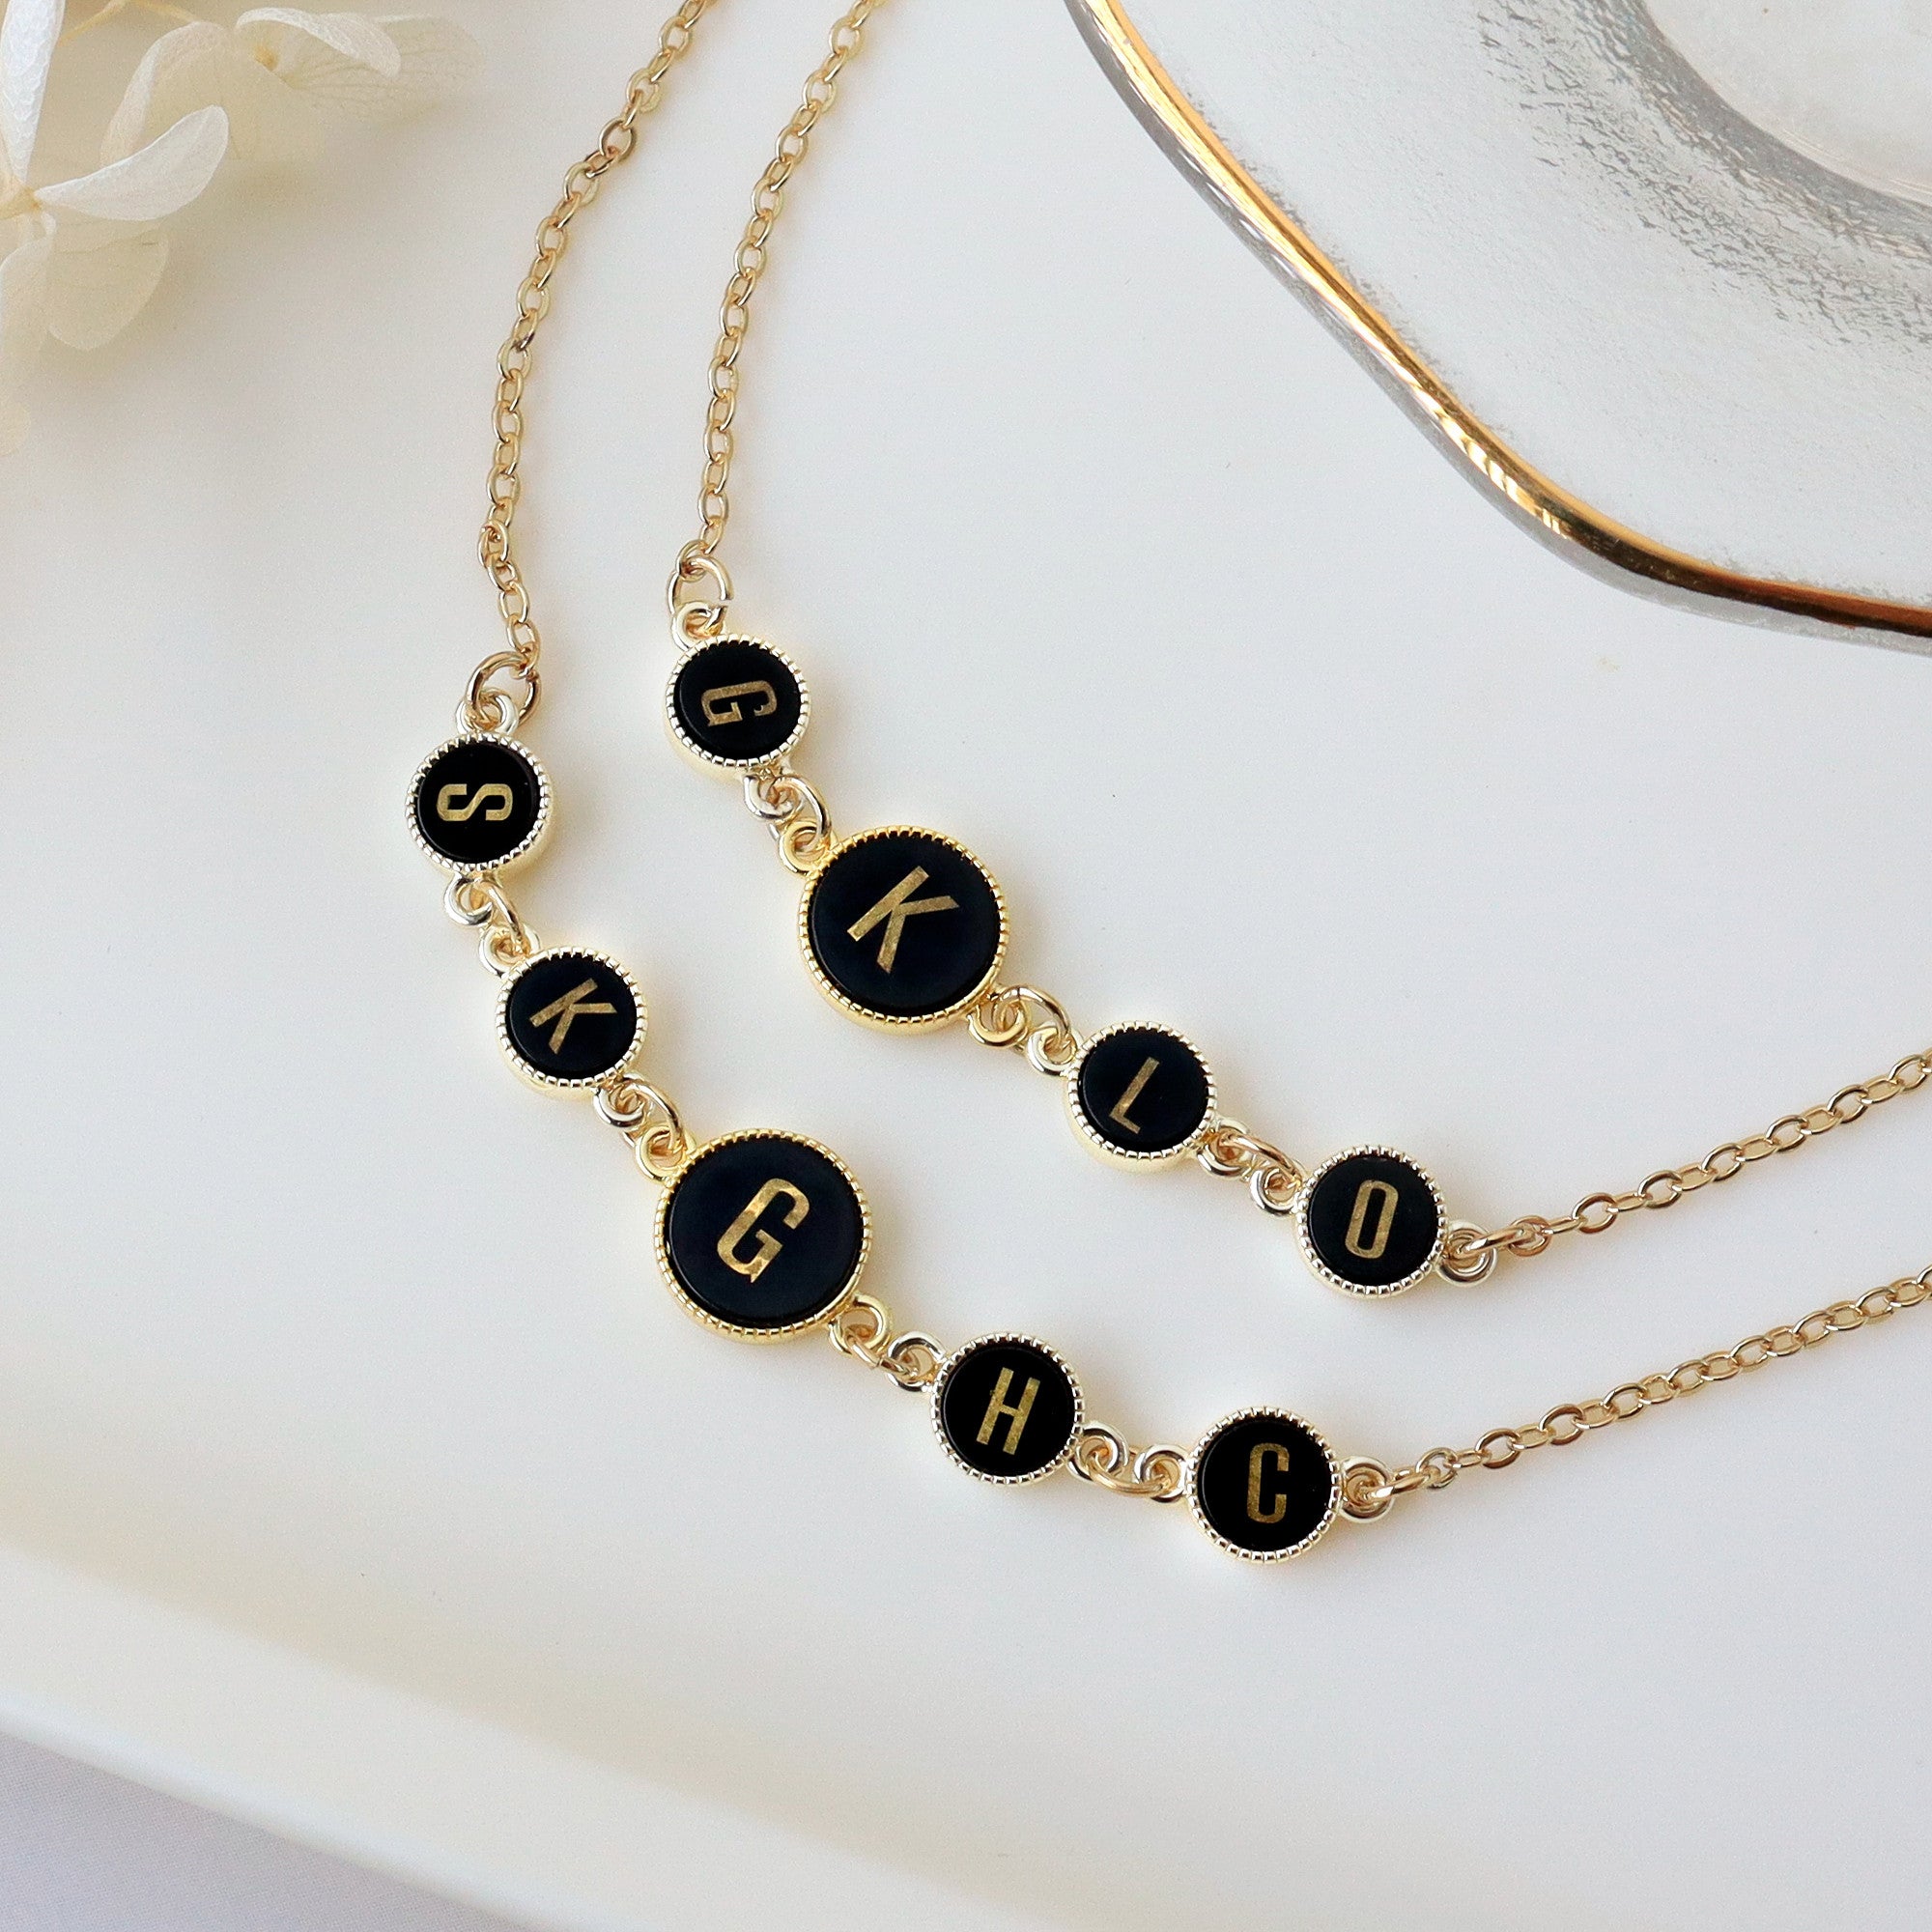 16" Gold Round 4~5 Black Obsidian Initial Letter Connector Necklace, Gemstone Necklace, Personalization Unique Jewelry KZ029